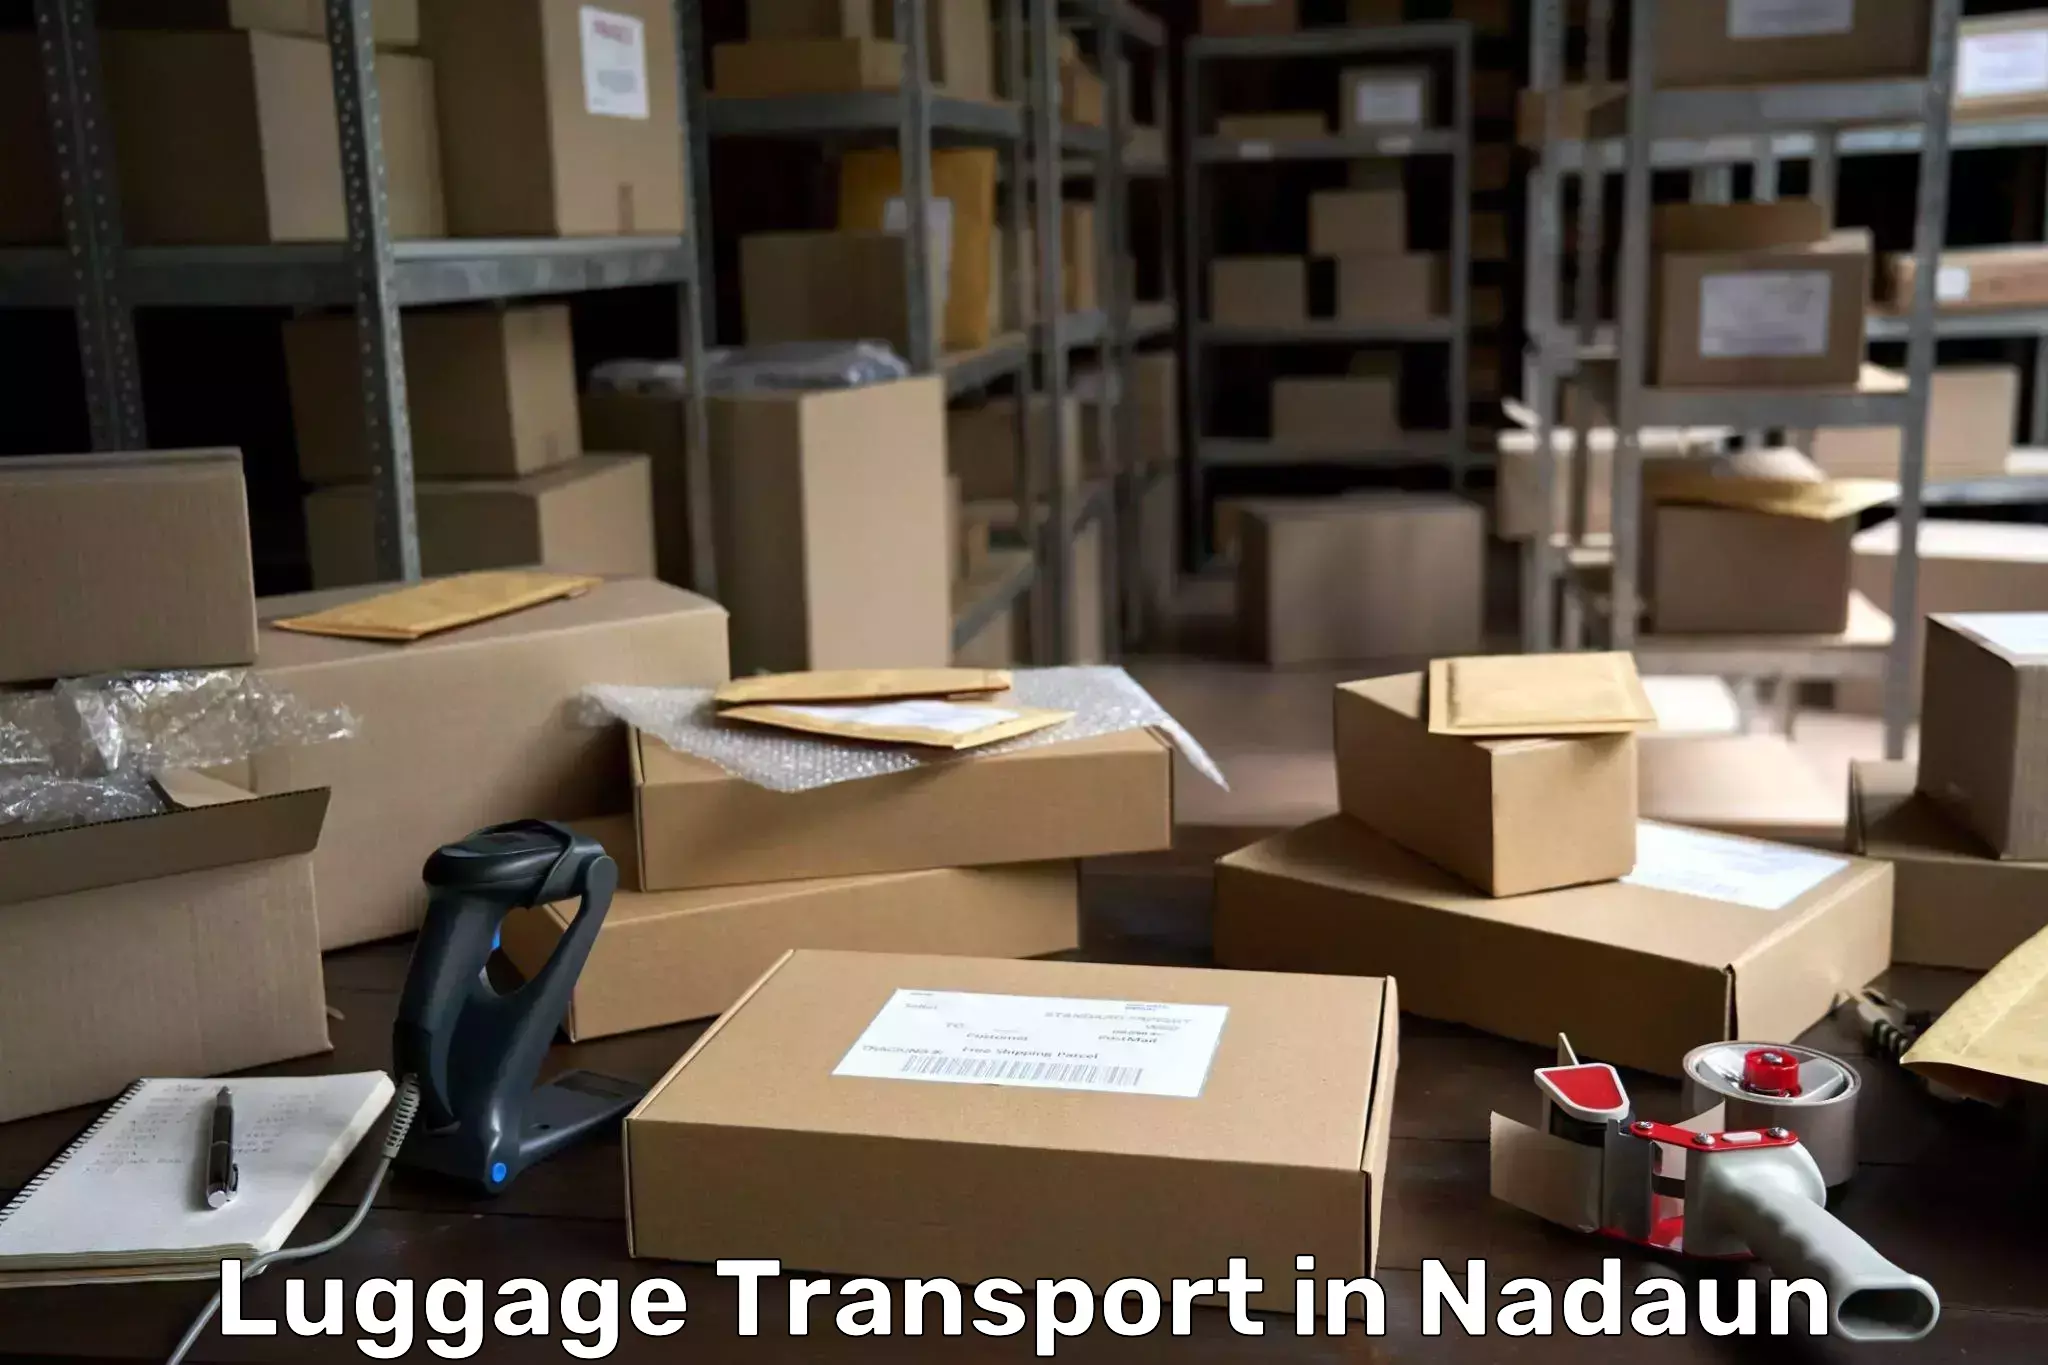 Holiday season luggage delivery in Nadaun